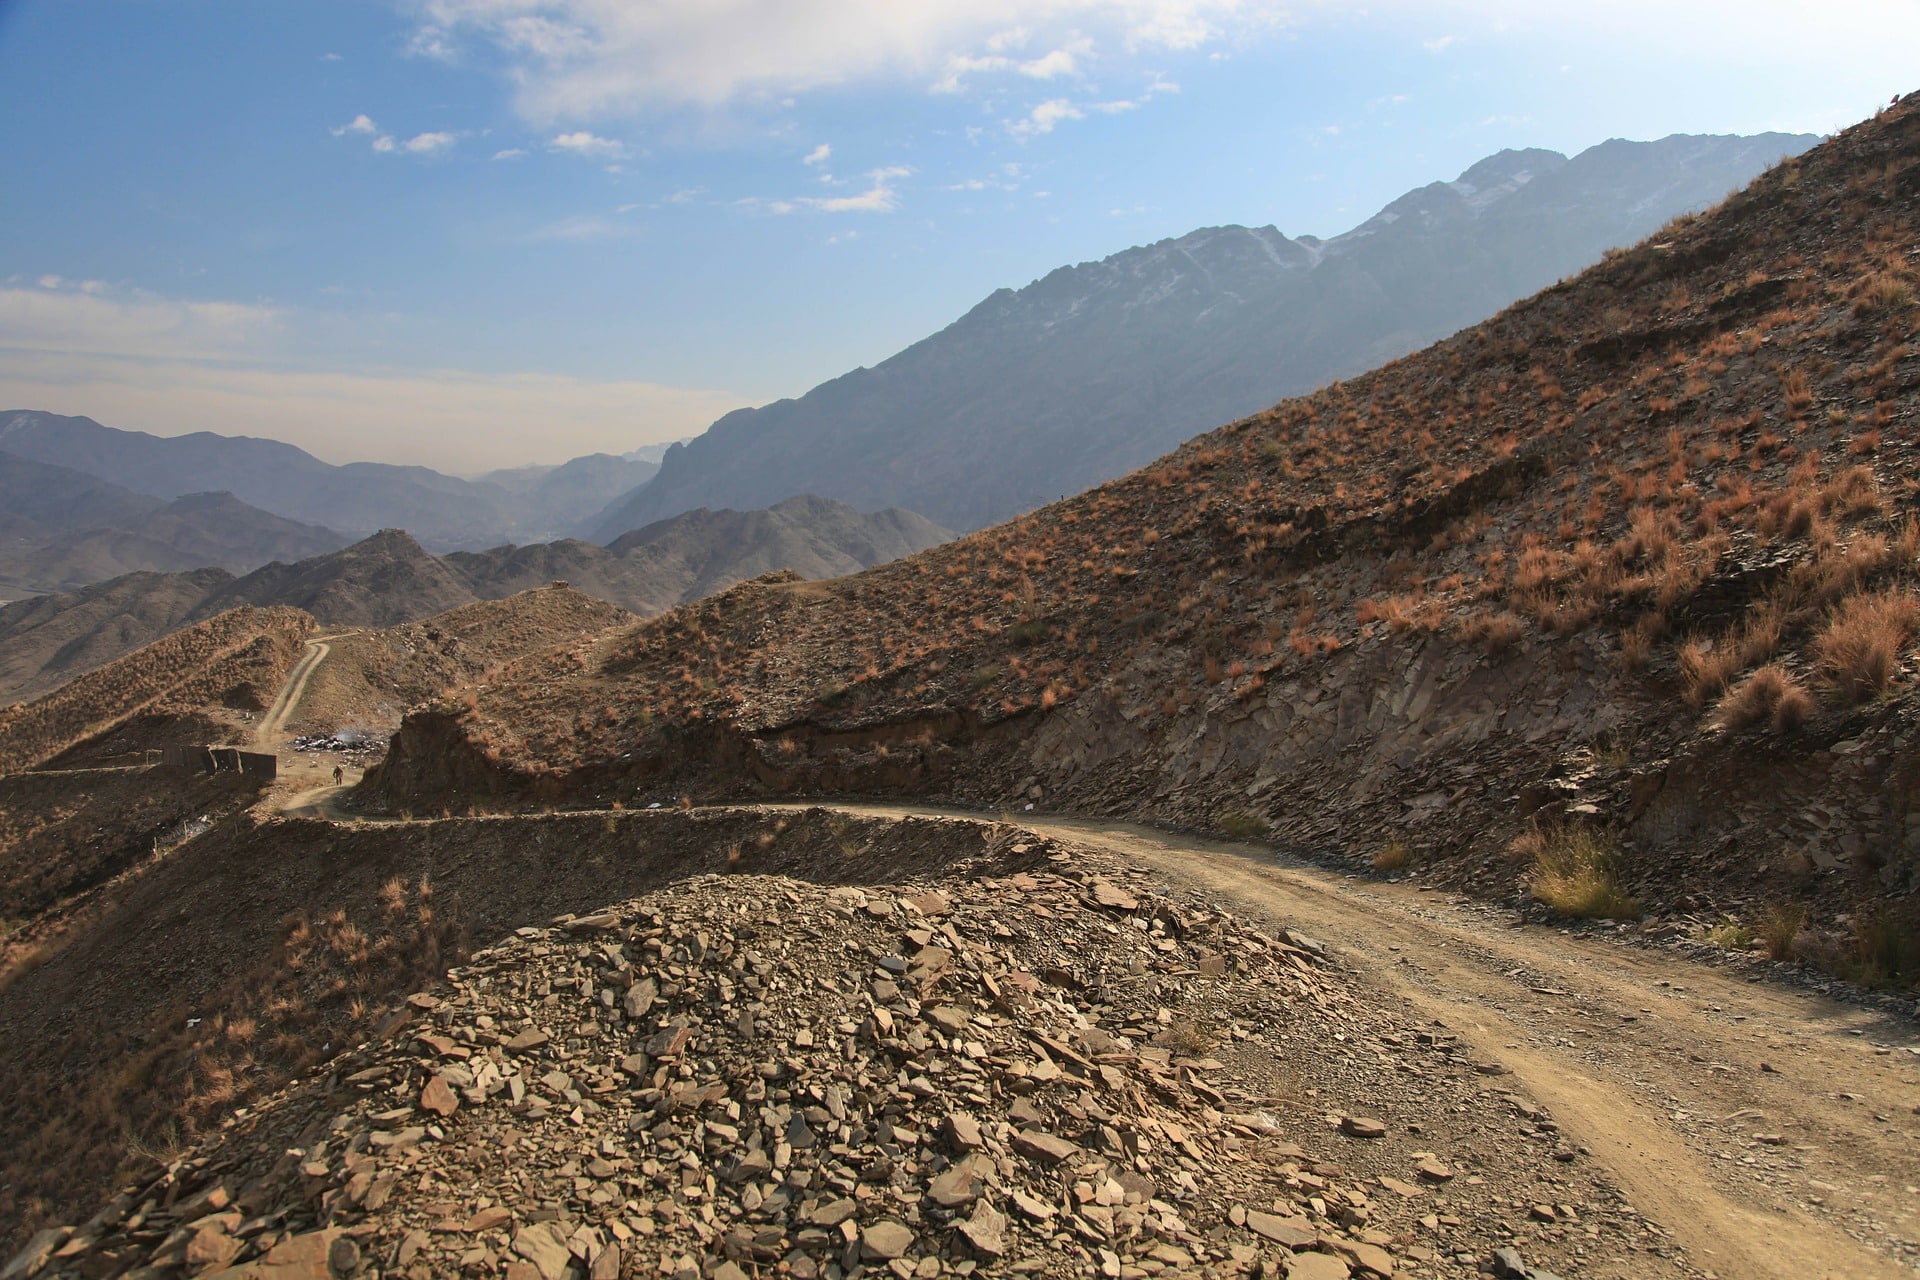 Mountain road in Afghanistan